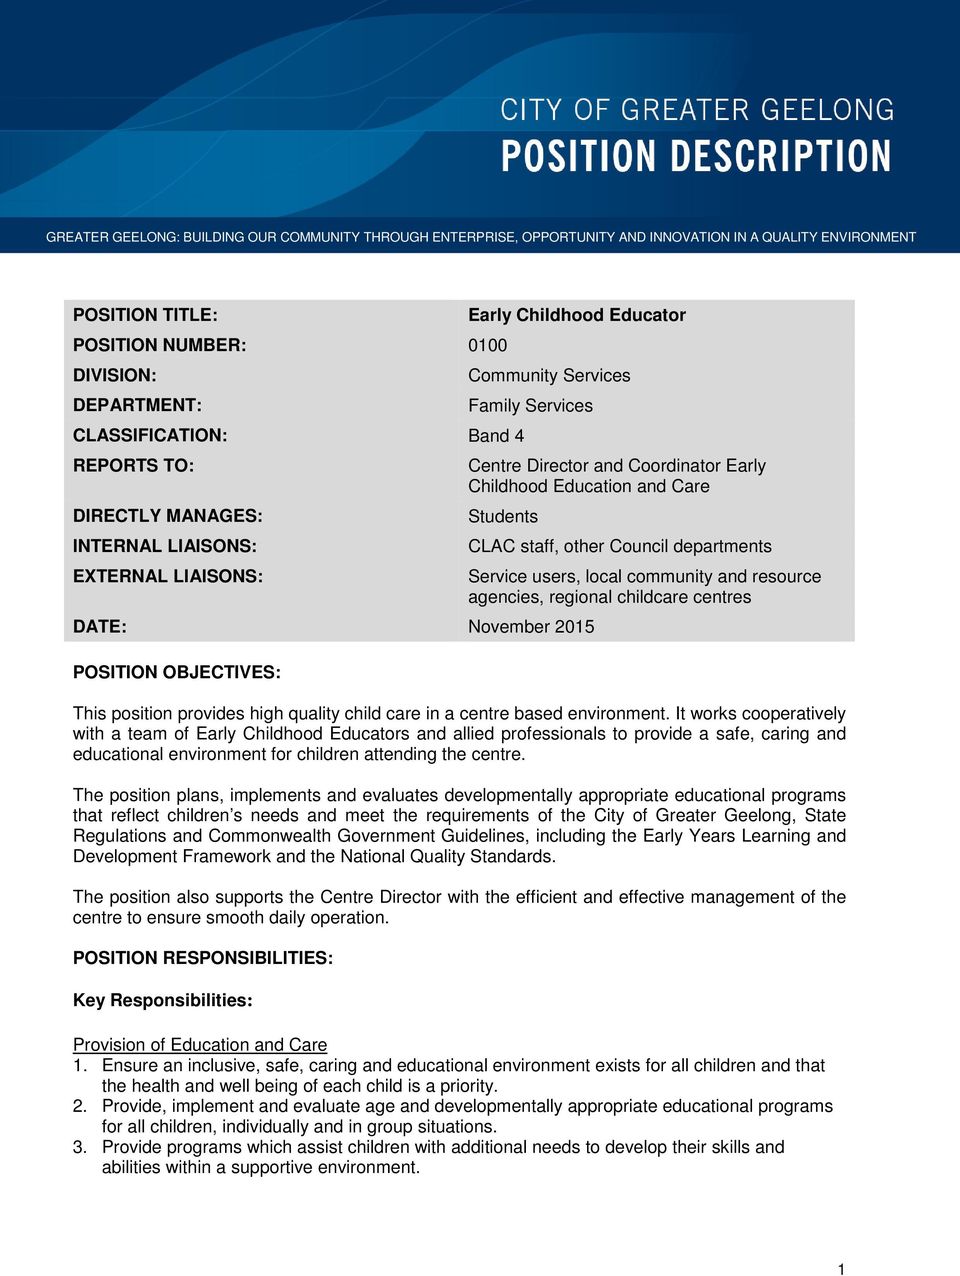 Students DATE: November 2015 POSITION OBJECTIVES: CLAC staff, other Council departments Service users, local community and resource agencies, regional childcare centres This position provides high